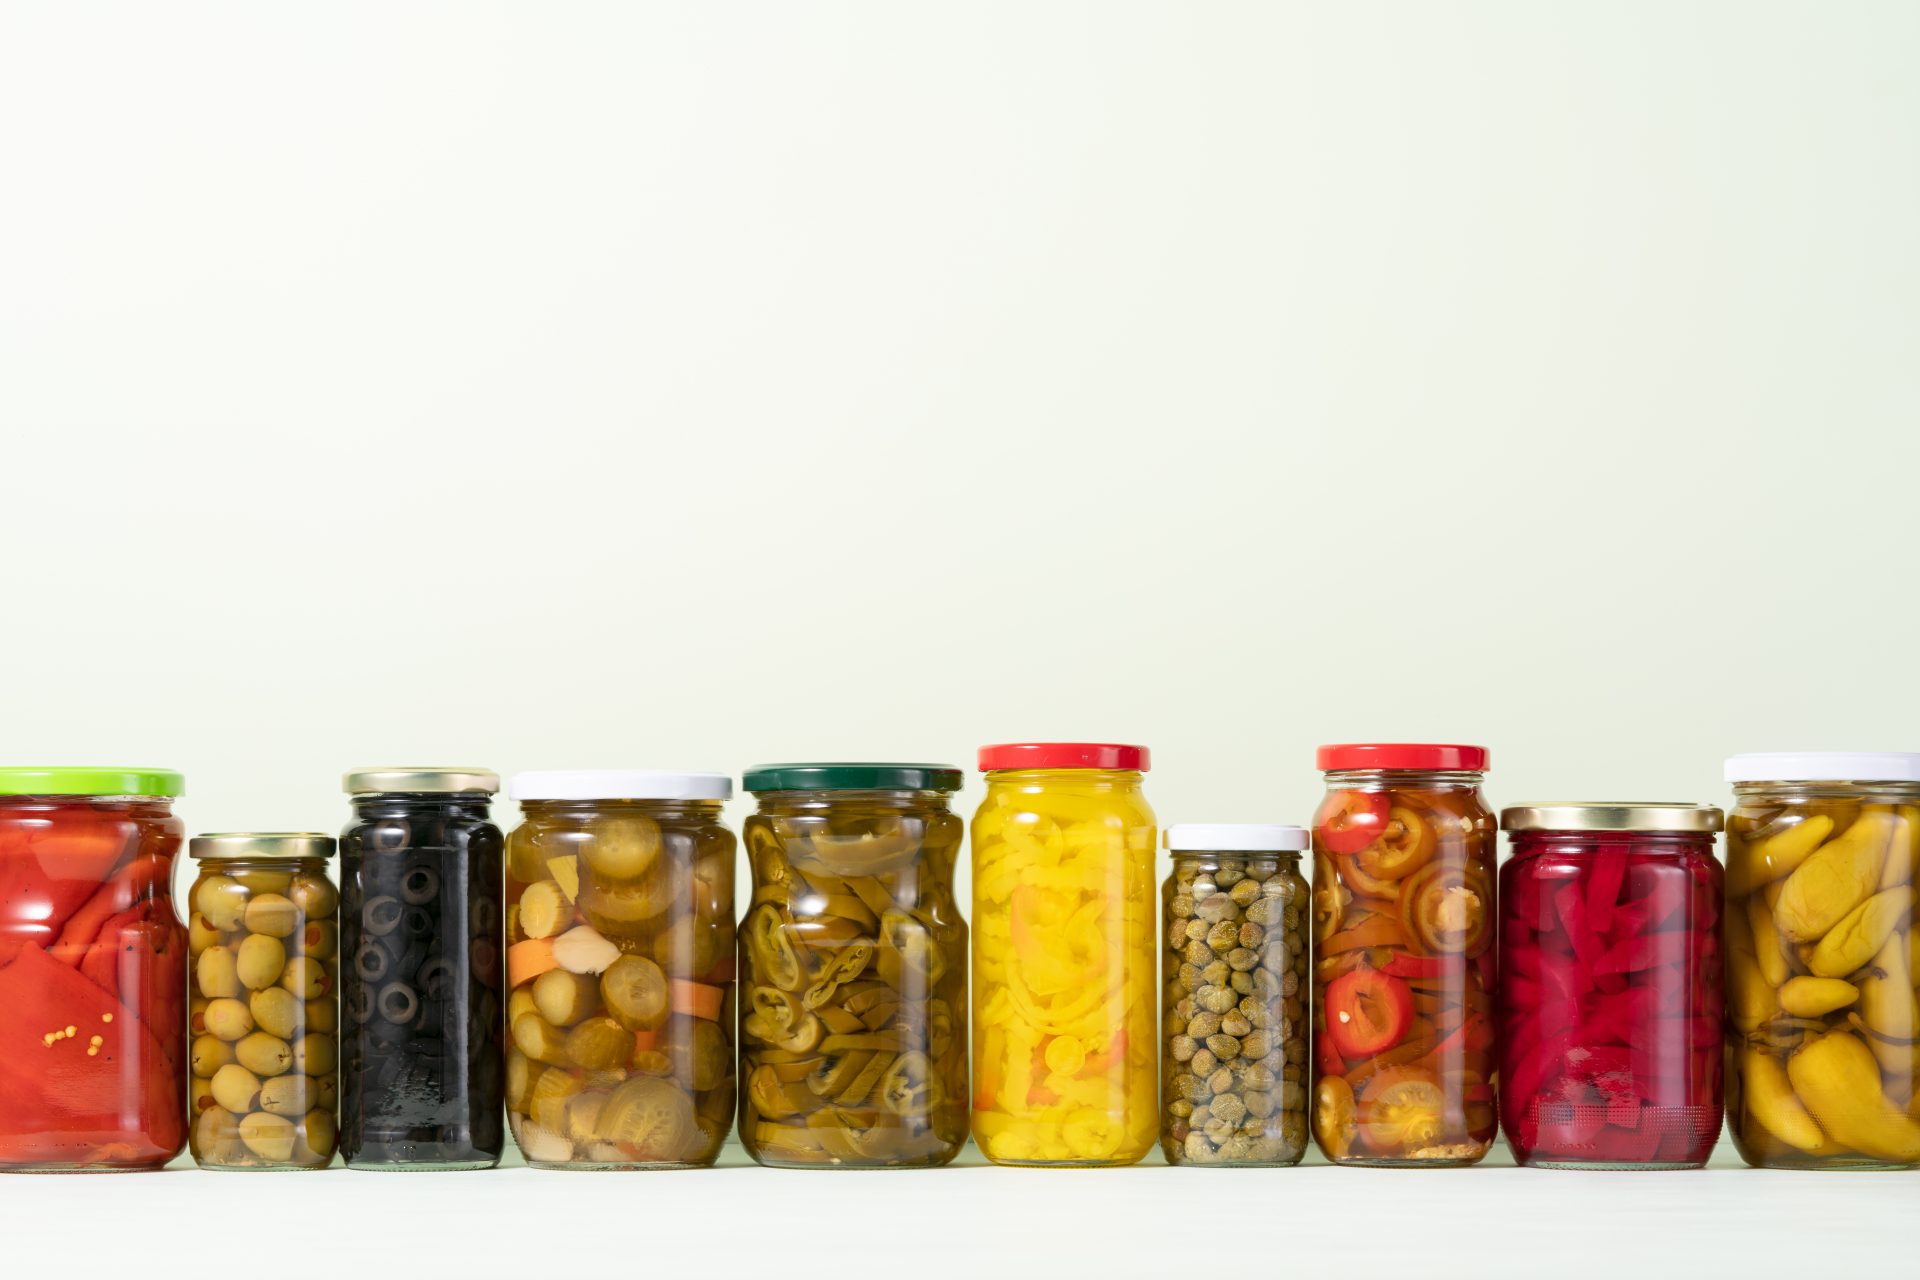 <p>While there are tons of different fermented foods, and it's a fairly new realm of study, a 2022 meta-analysis published in the journal Nutrients highlighted some of the most solid scientific evidence around the specific health effects of fermented foods so far.</p>